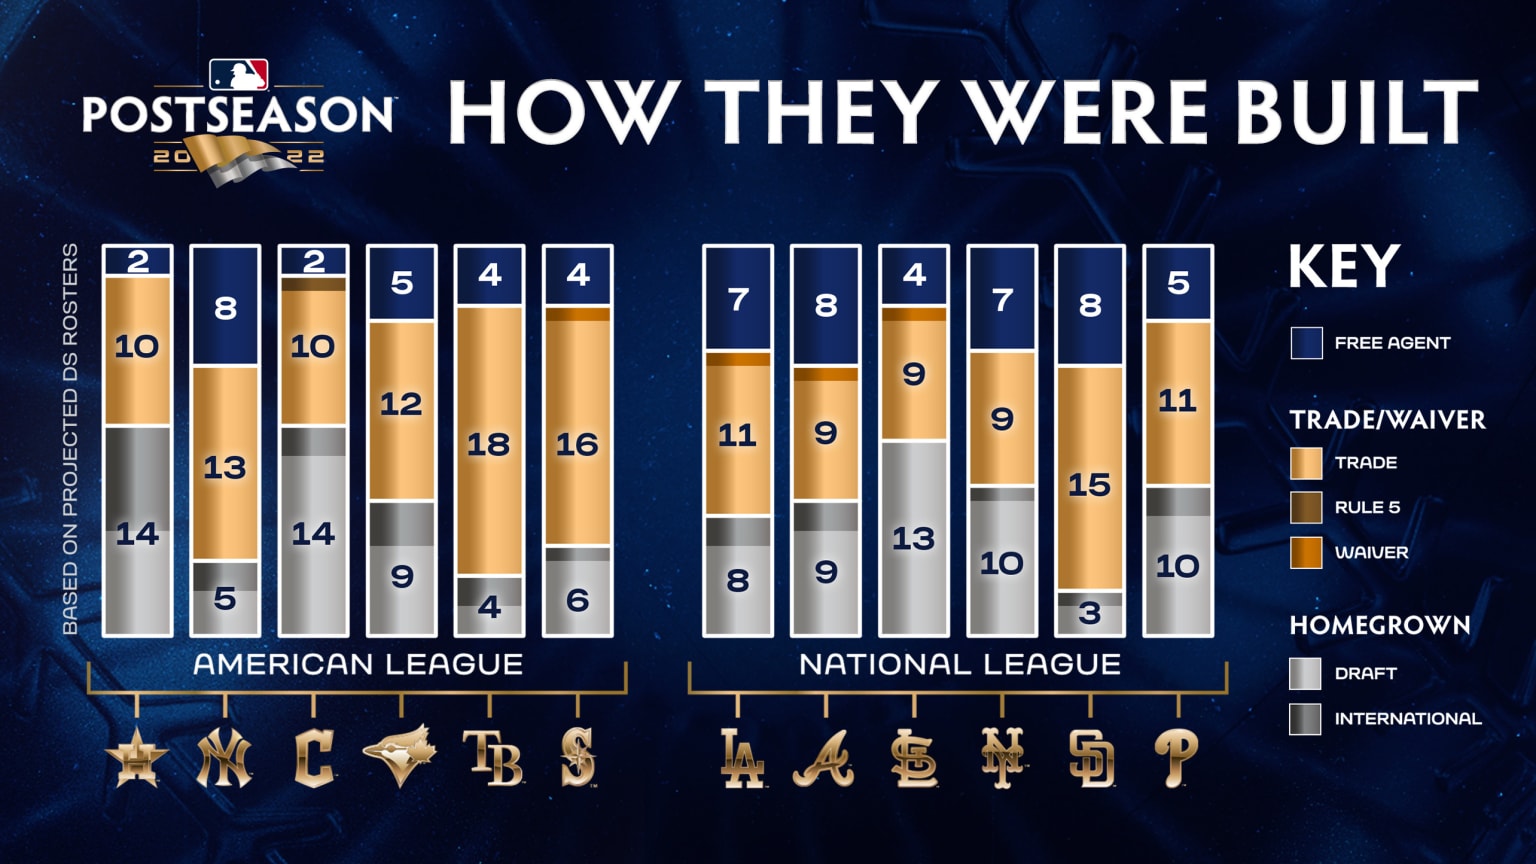 An infographic breaks down how postseason teams acquired their players